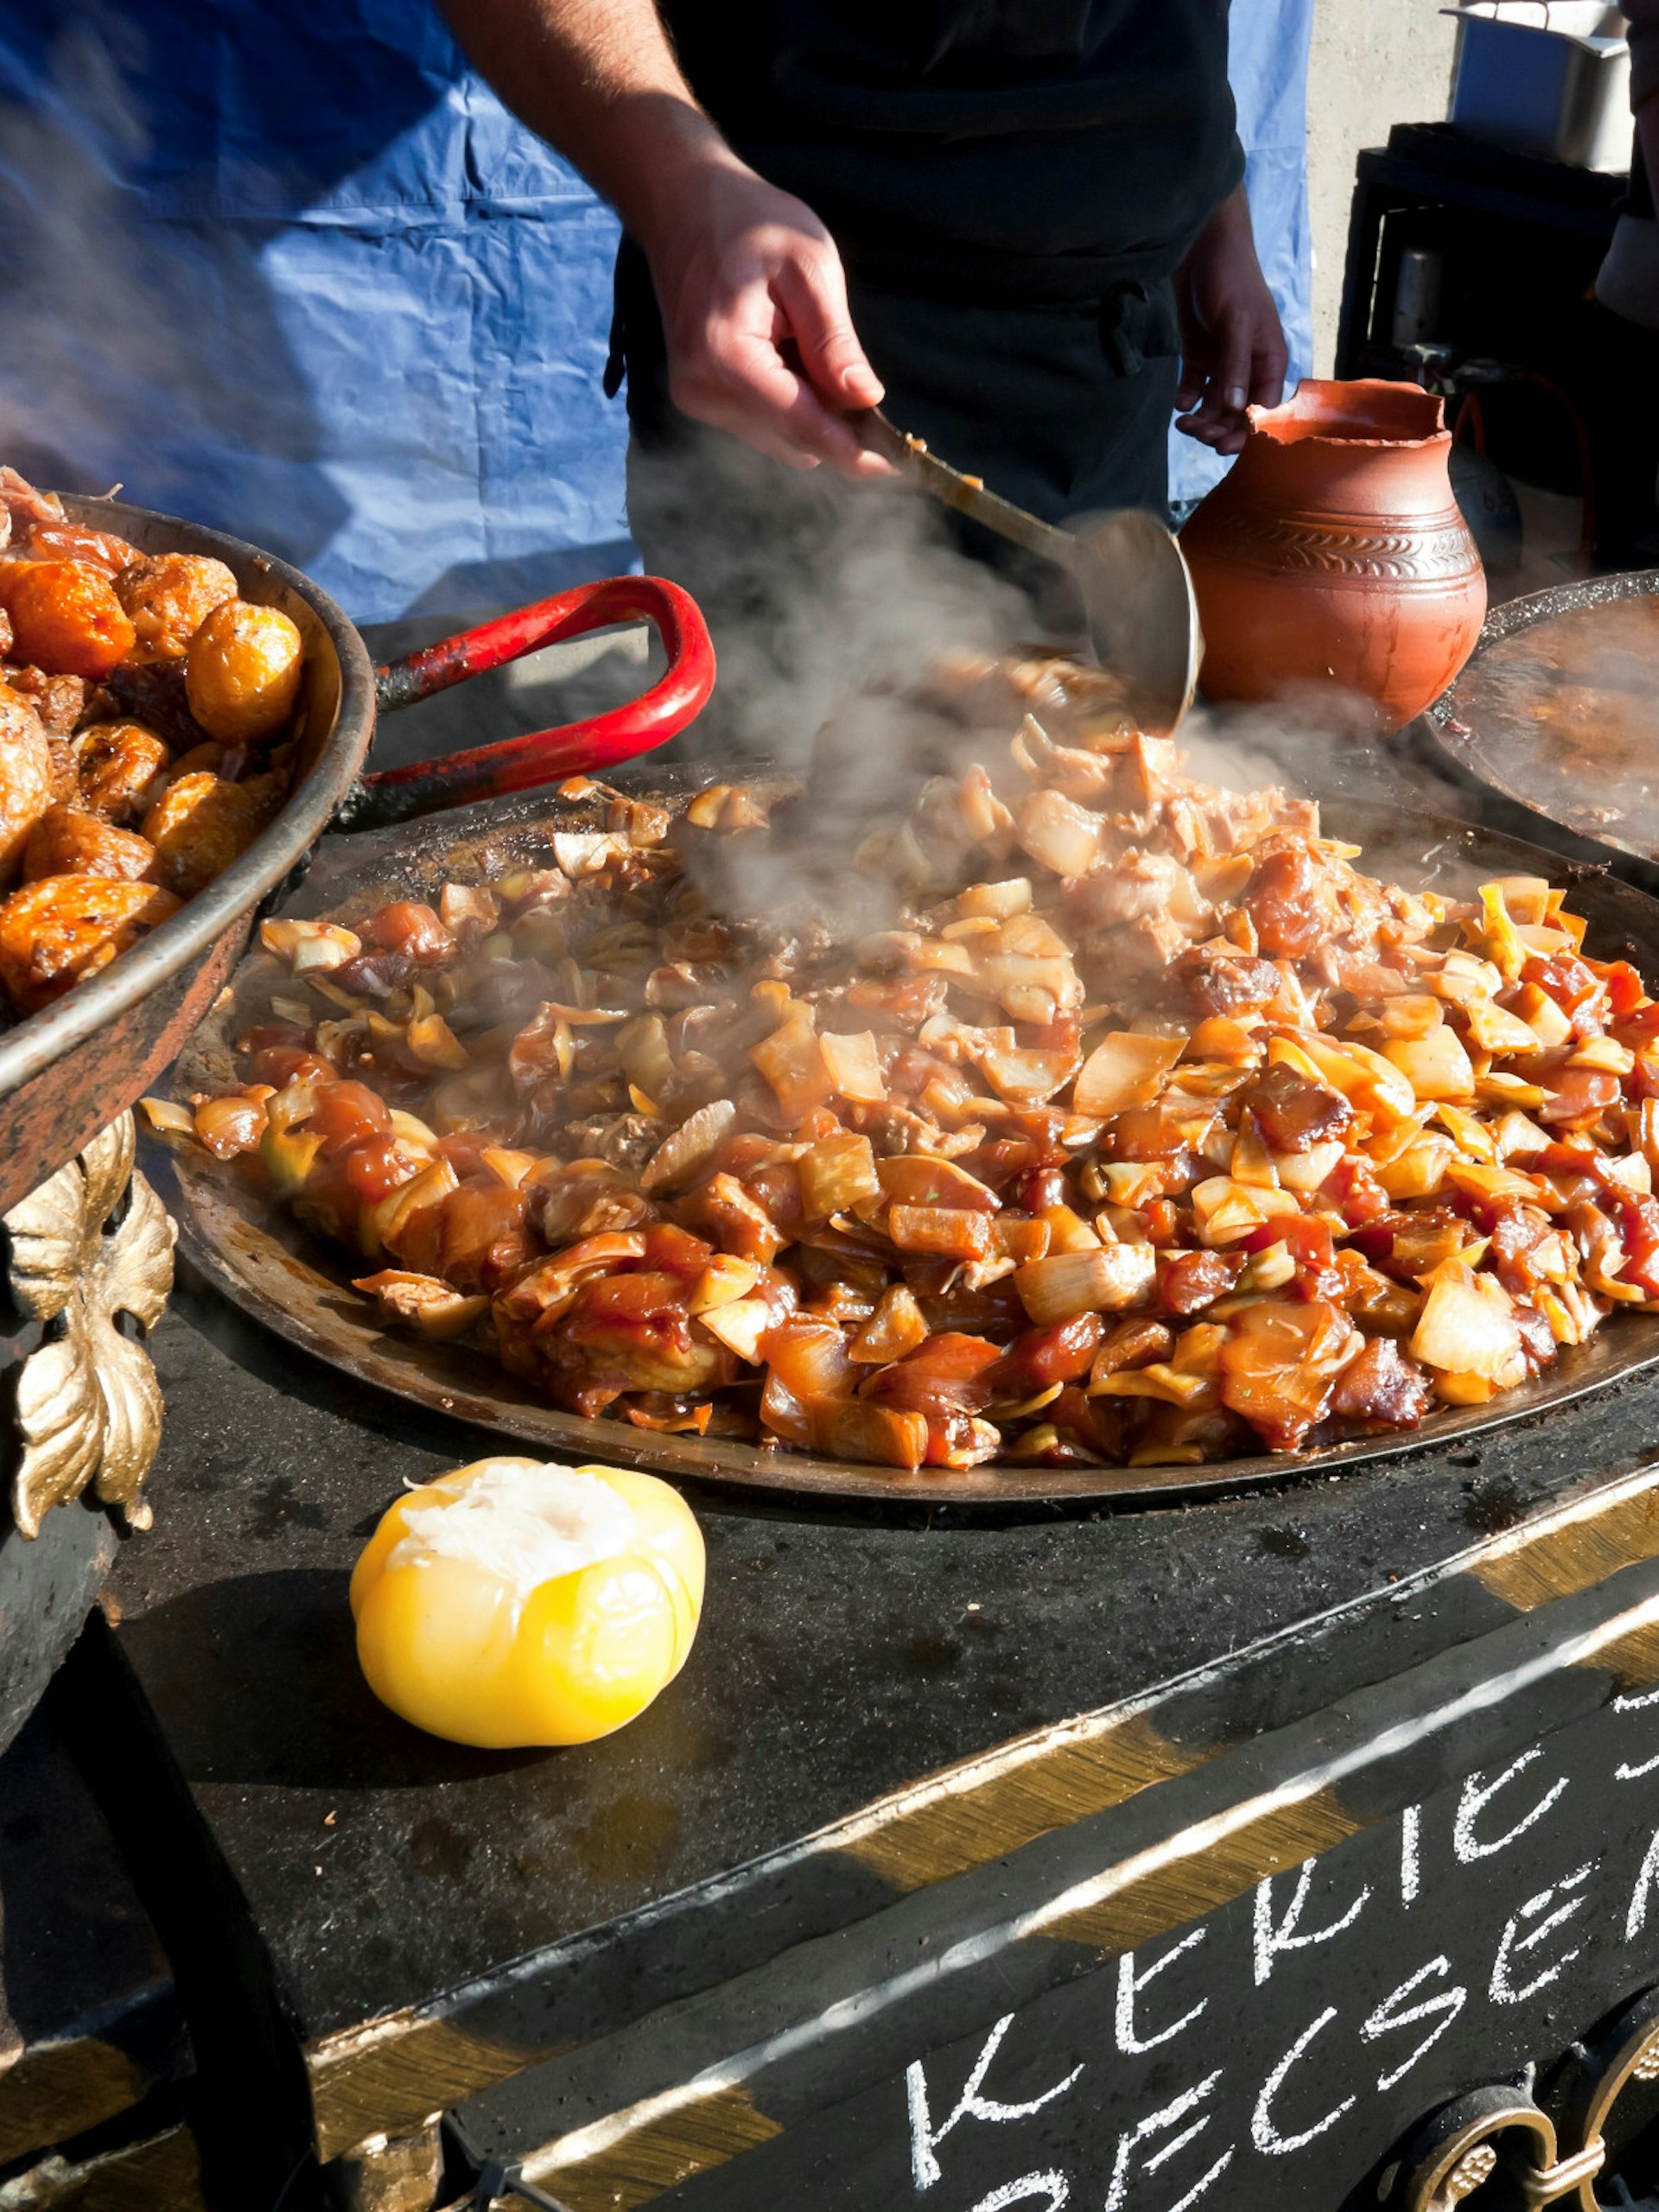 Traditional Hungarian food sold at a street stand during a carnival